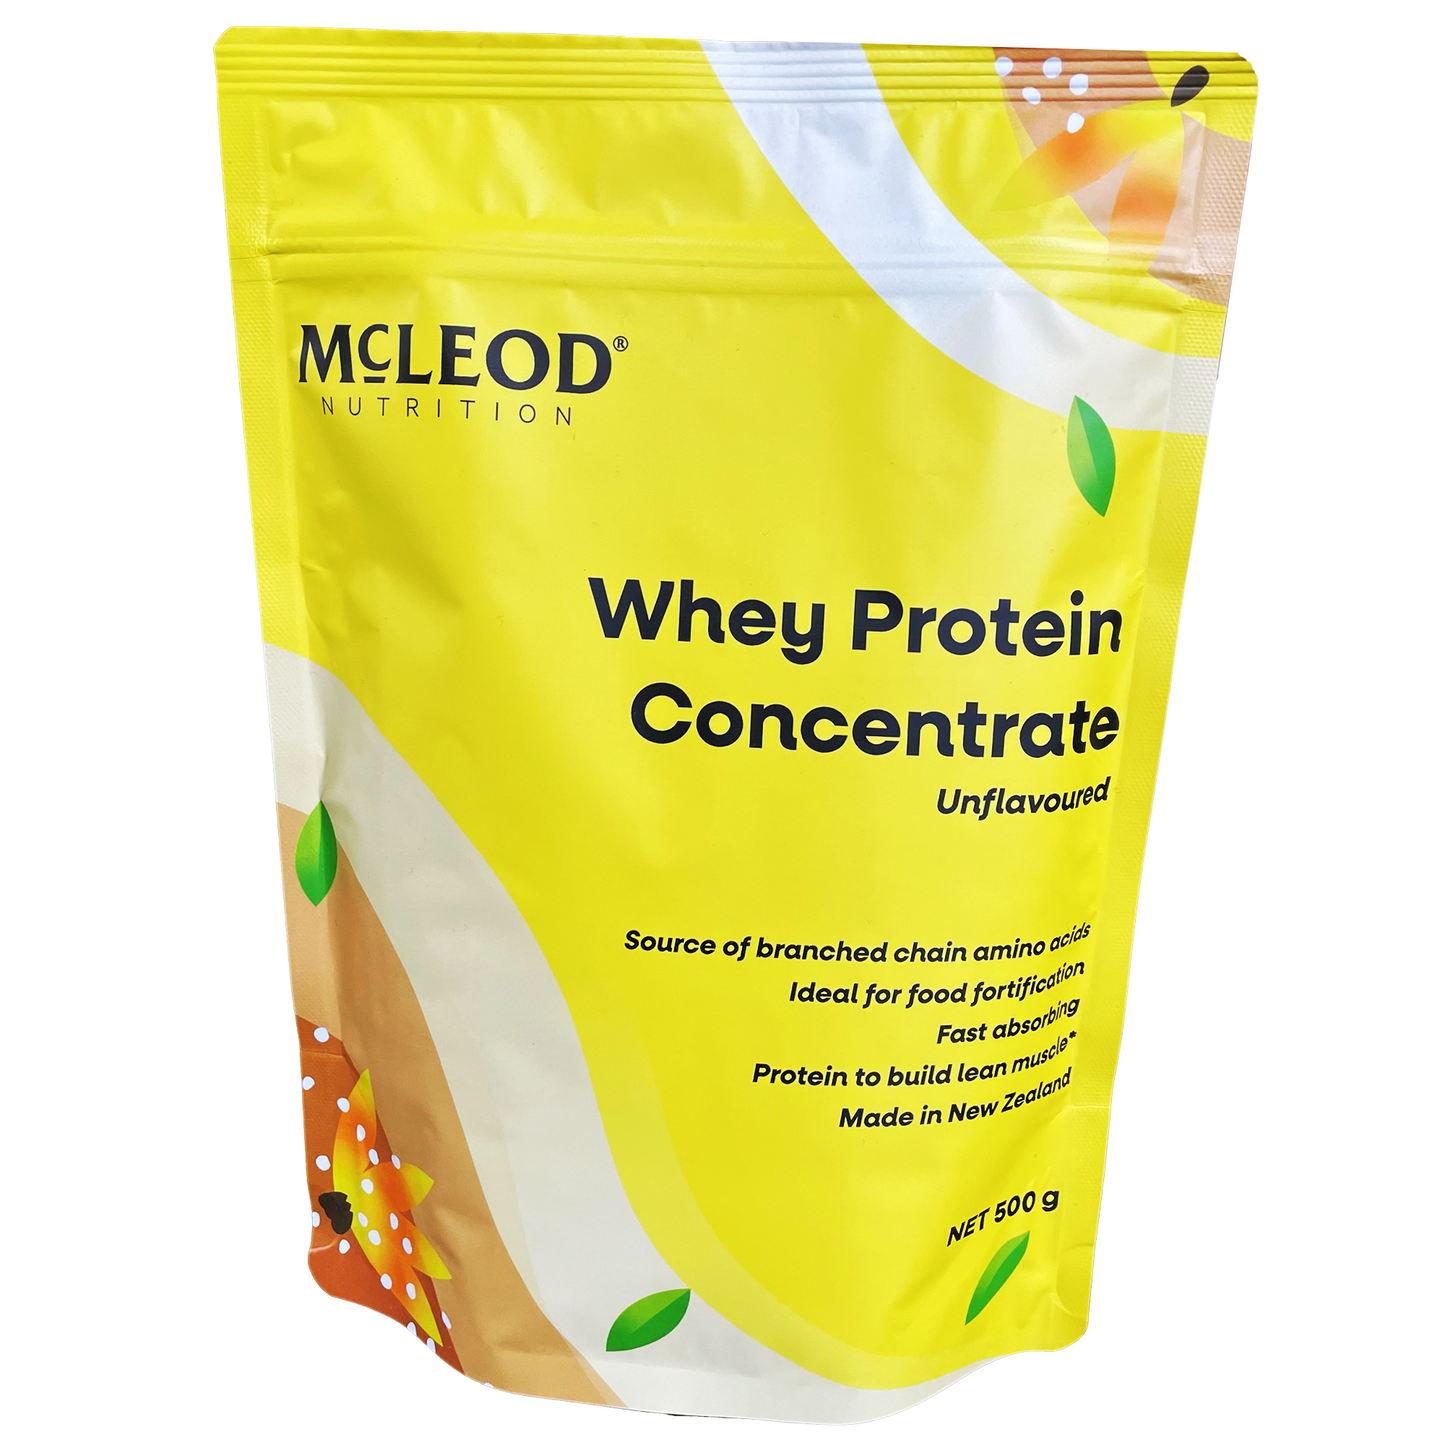 Unflavoured Whey Protein Concentrate 500g